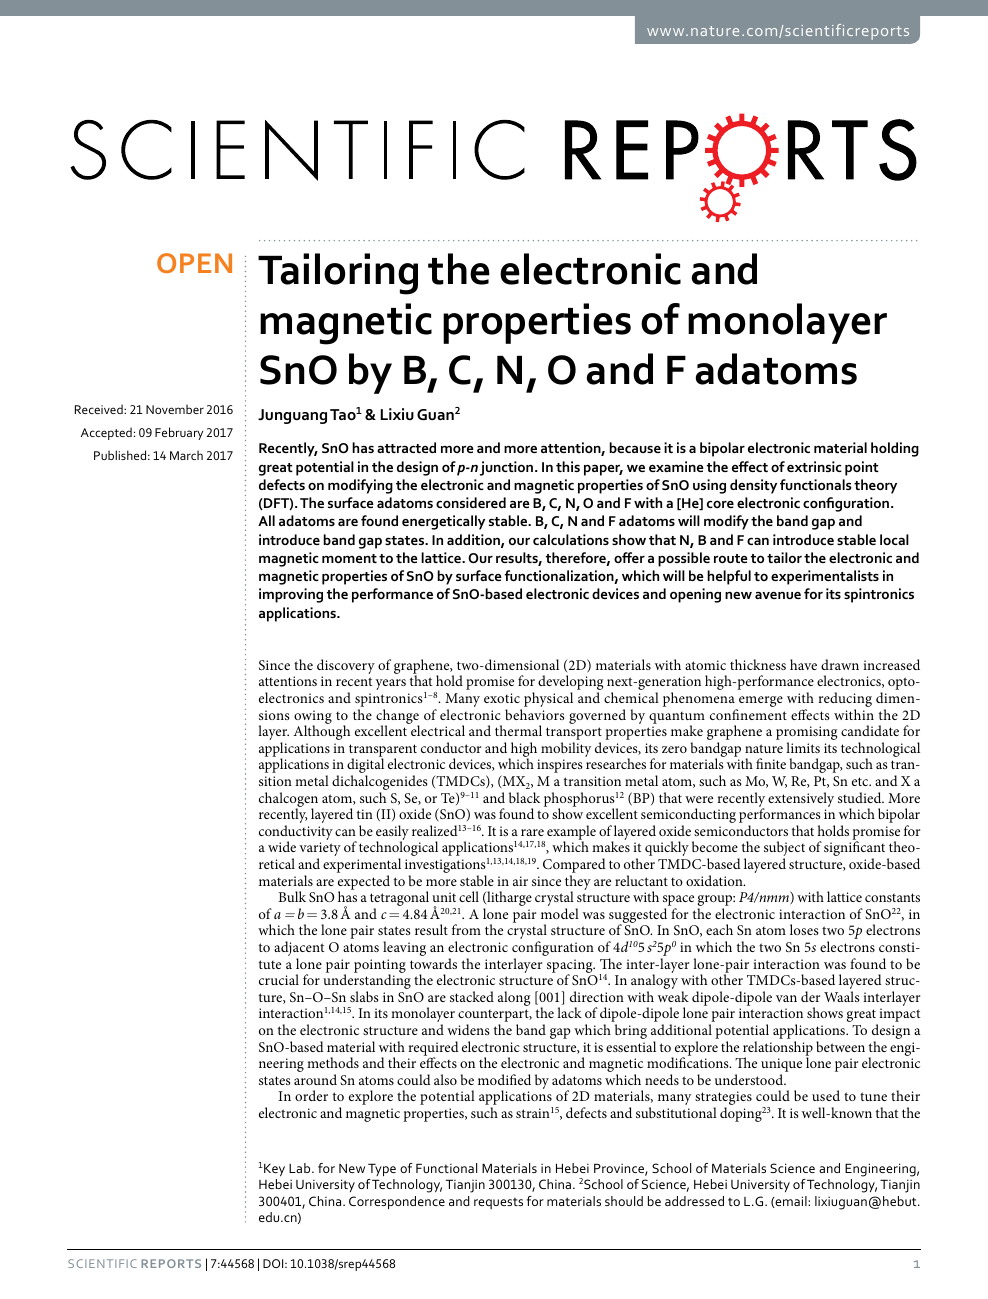 Tailoring The Electronic And Magnetic Properties Of Monolayer Sno By B C N O And F Adatoms Topic Of Research Paper In Nano Technology Download Scholarly Article Pdf And Read For Free